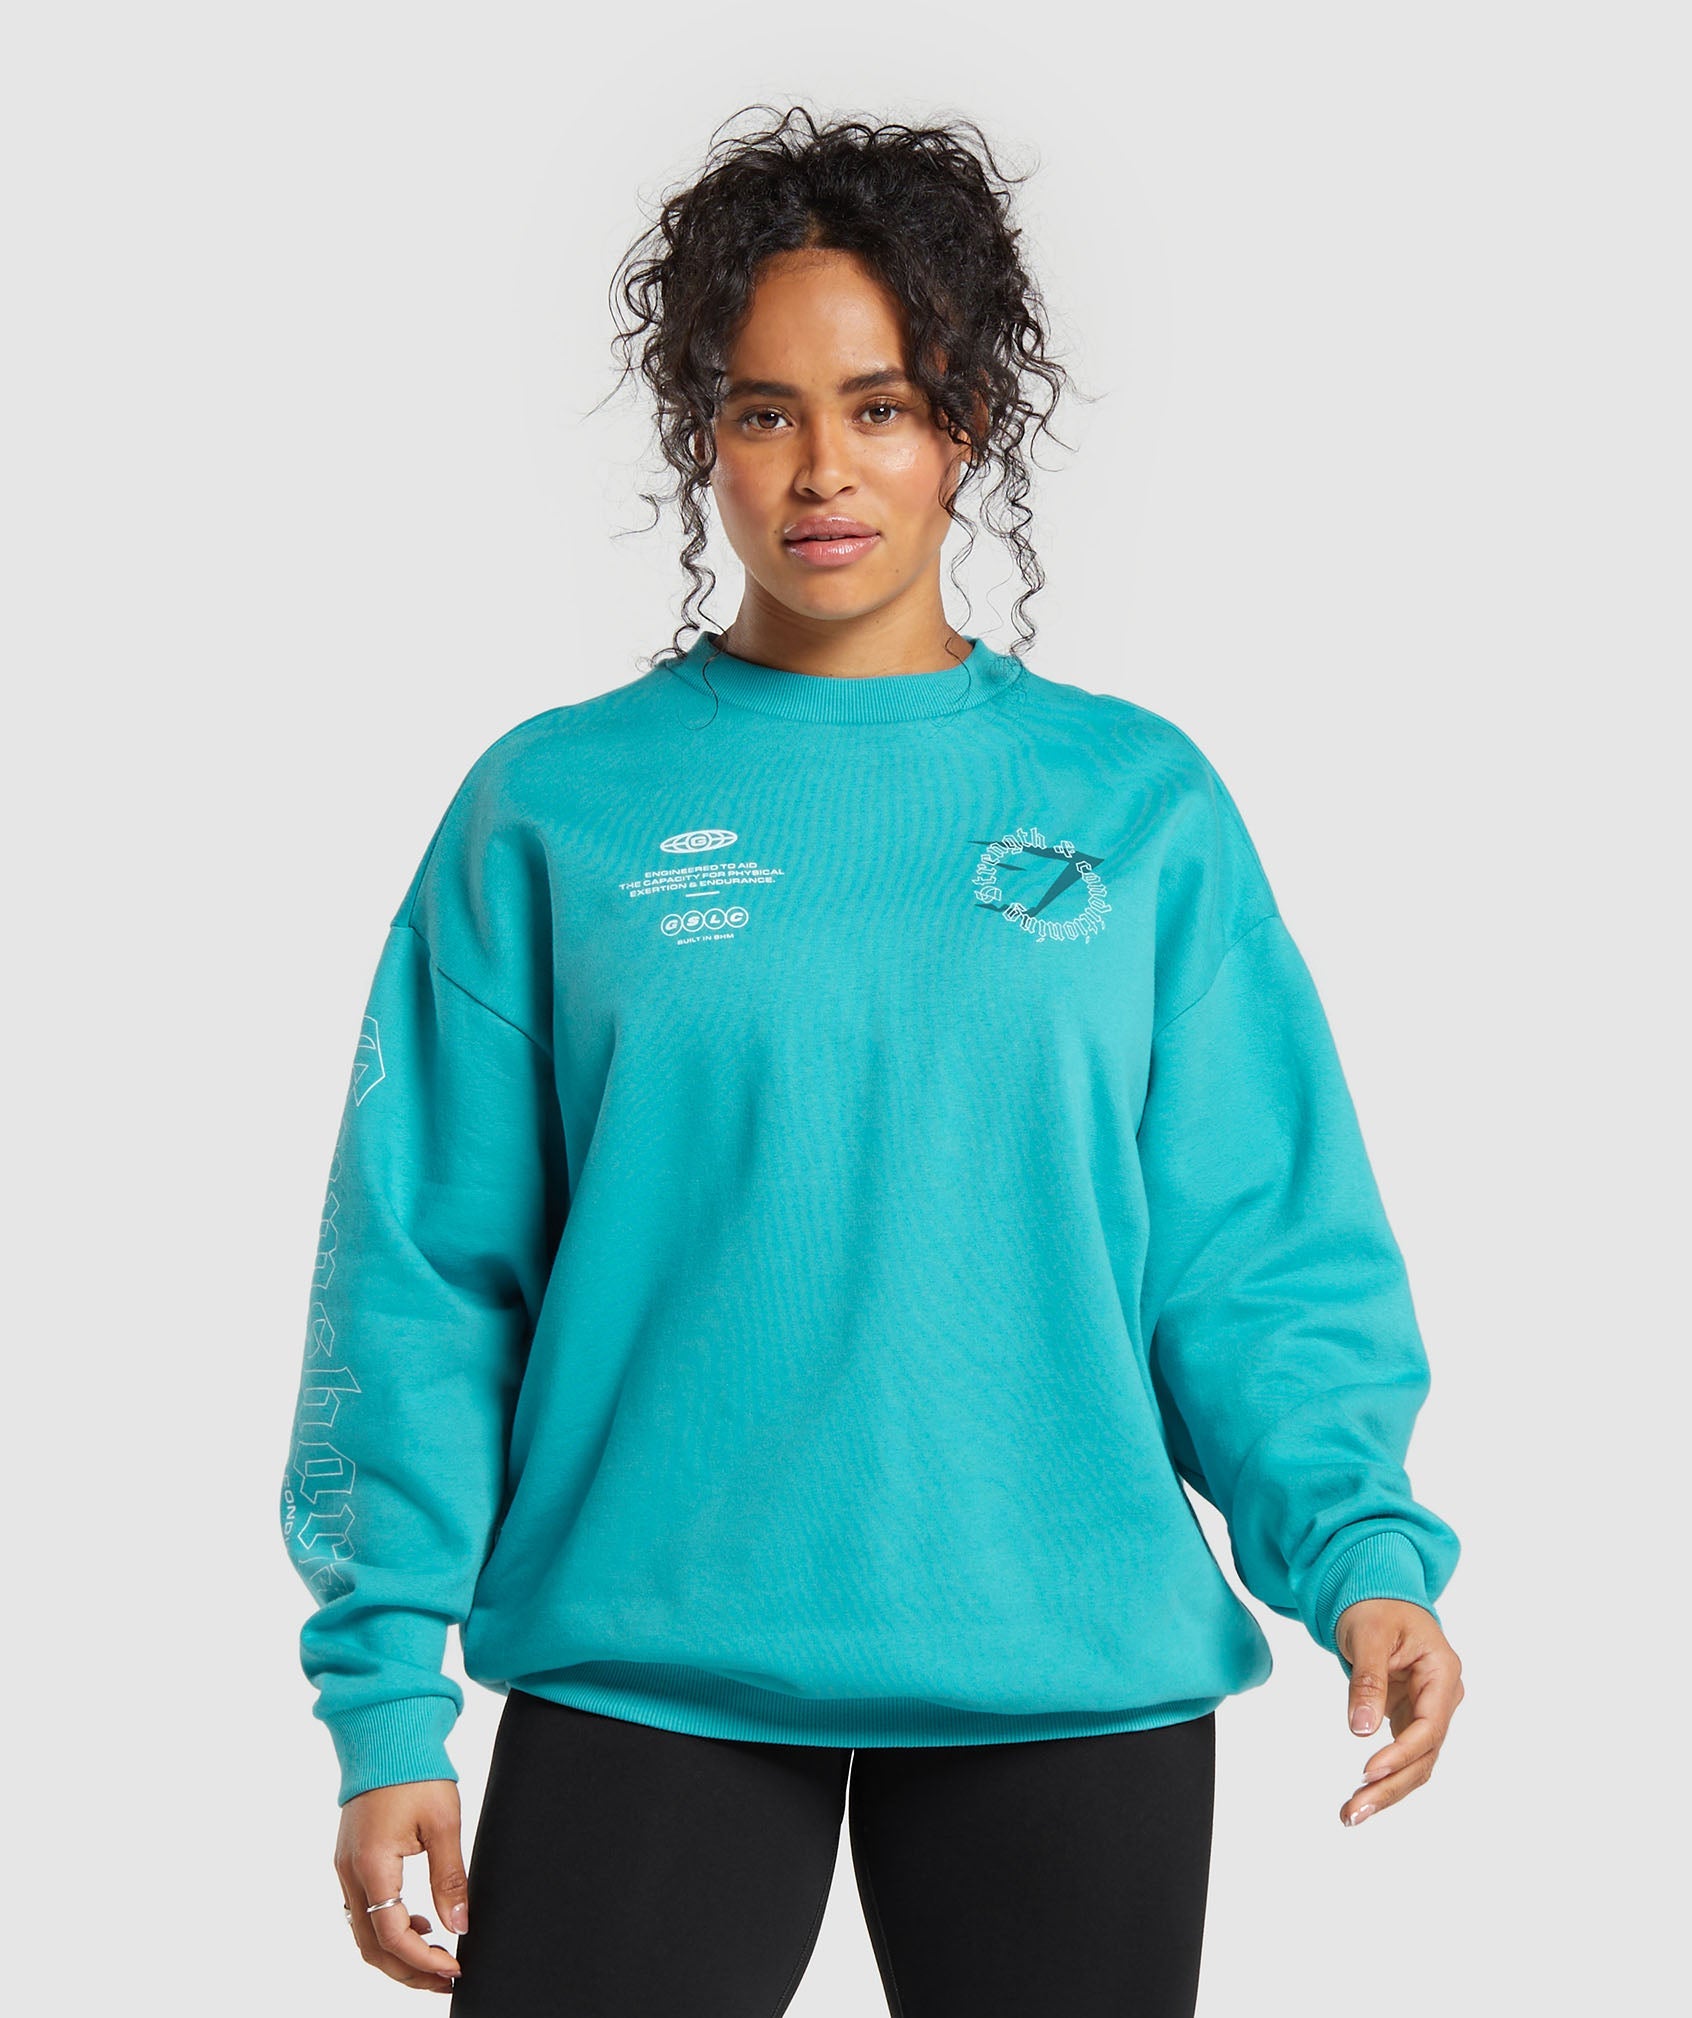 Strength & Conditioning Oversized Sweatshirt in Artificial Teal - view 1